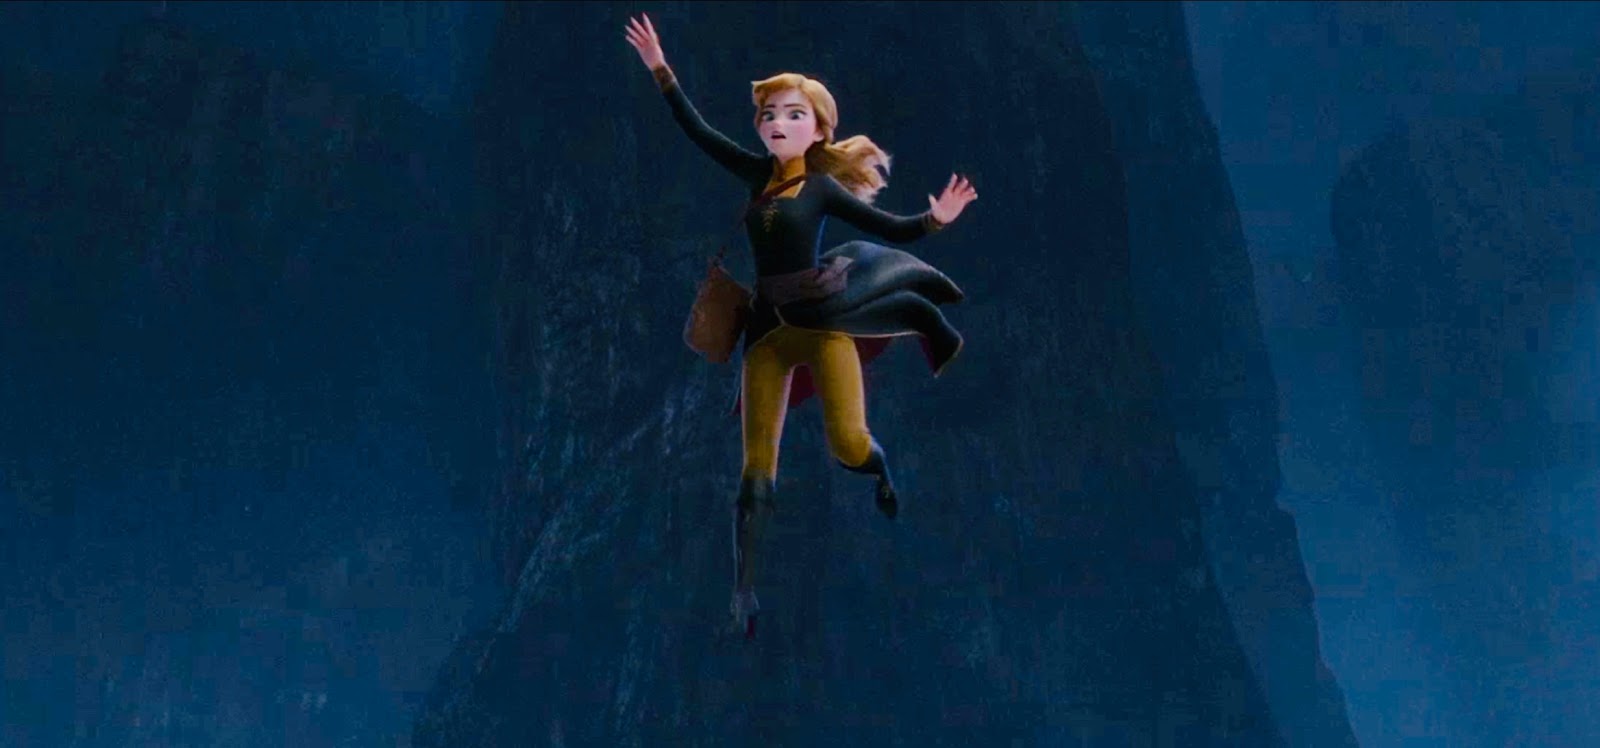 Anna jumps from a high rock in Frozen II.